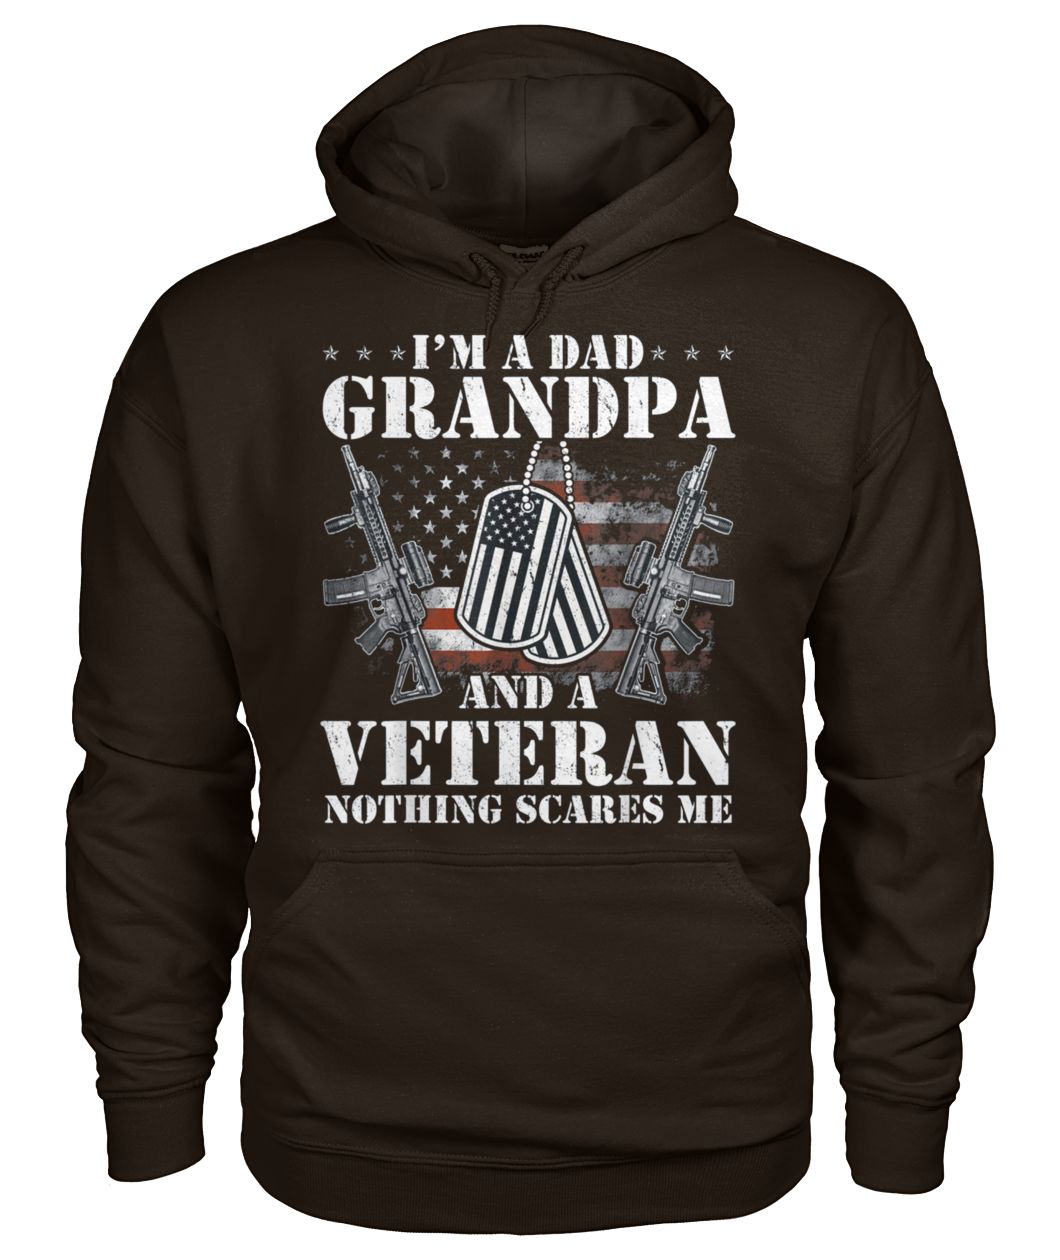 I'm a dad grandpa and a veteran nothing scares me gildan hoodie